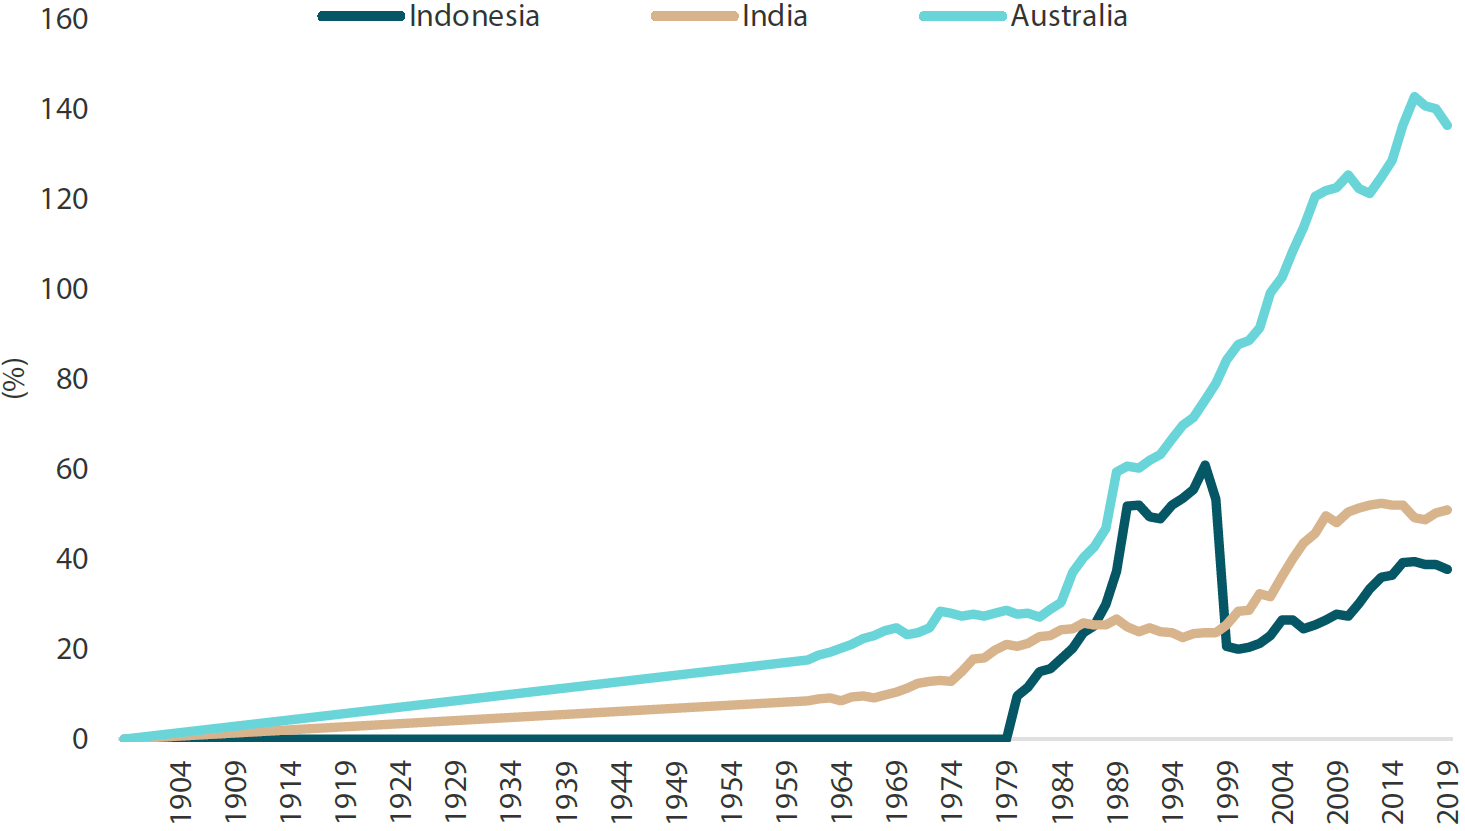 Domestic private credit to nominal GDP (%) of Indonesia, India and Australia